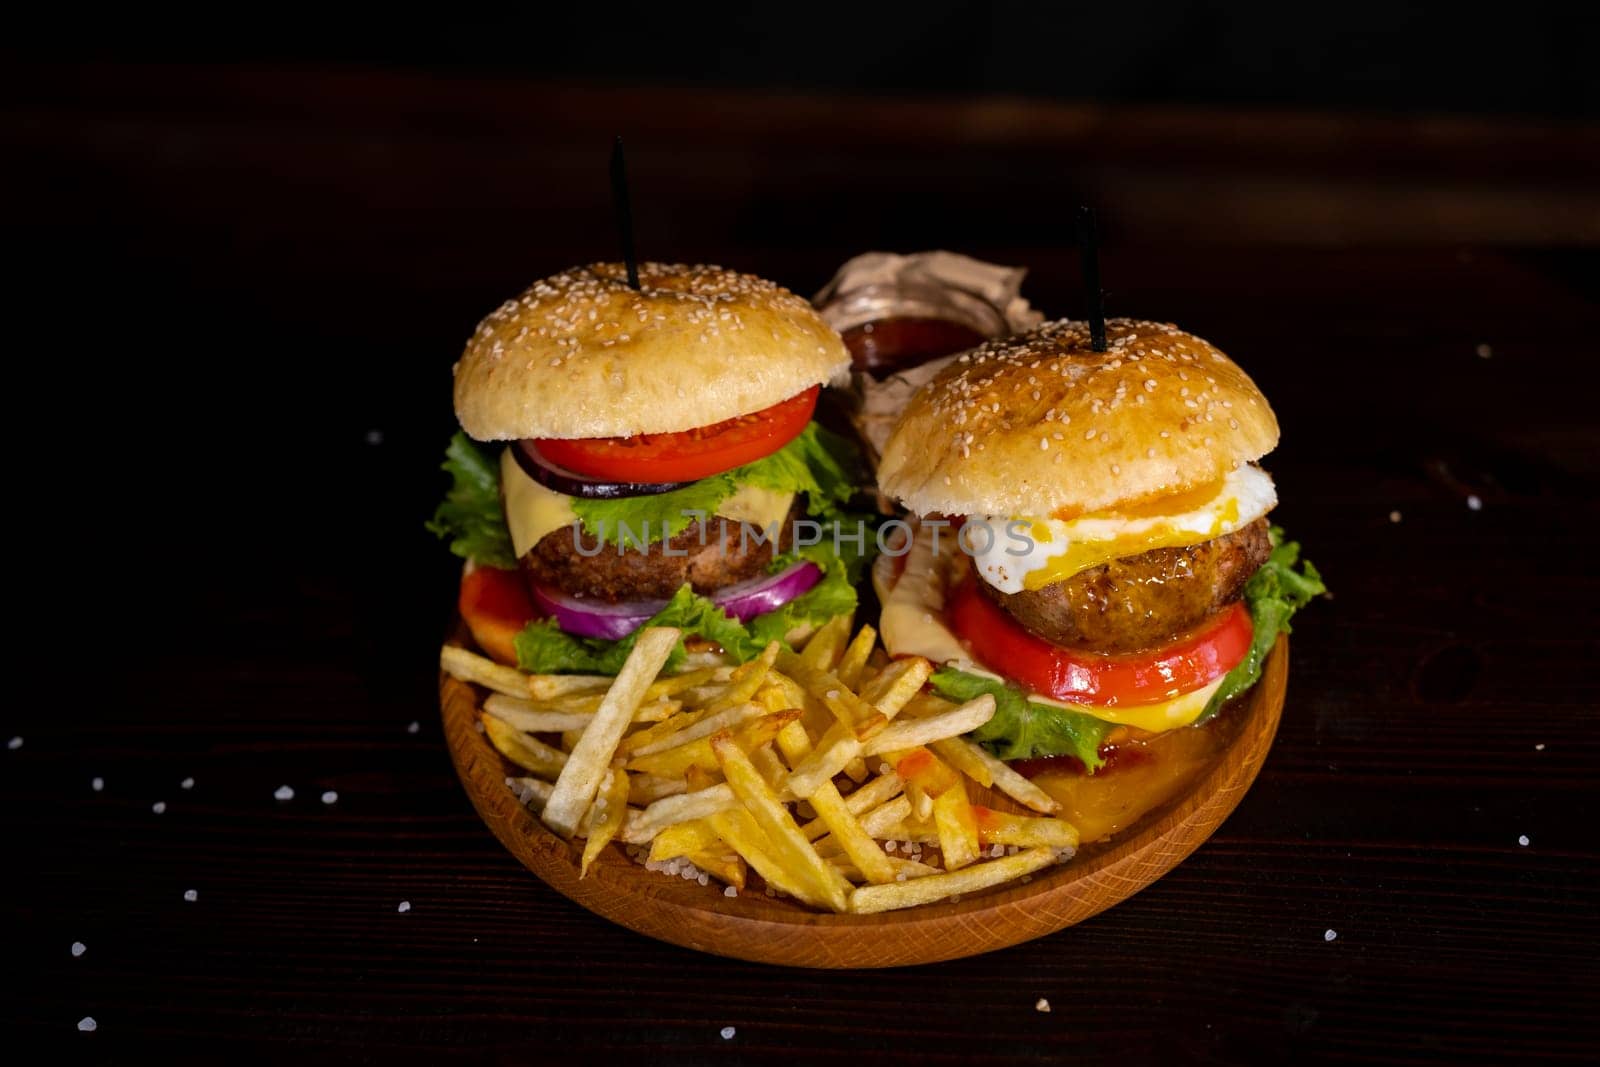 Burger, hamburger with egg or cheeseburger served with french fries, pickles and onion on wooden board. Top view. Fast food concept. High quality photo